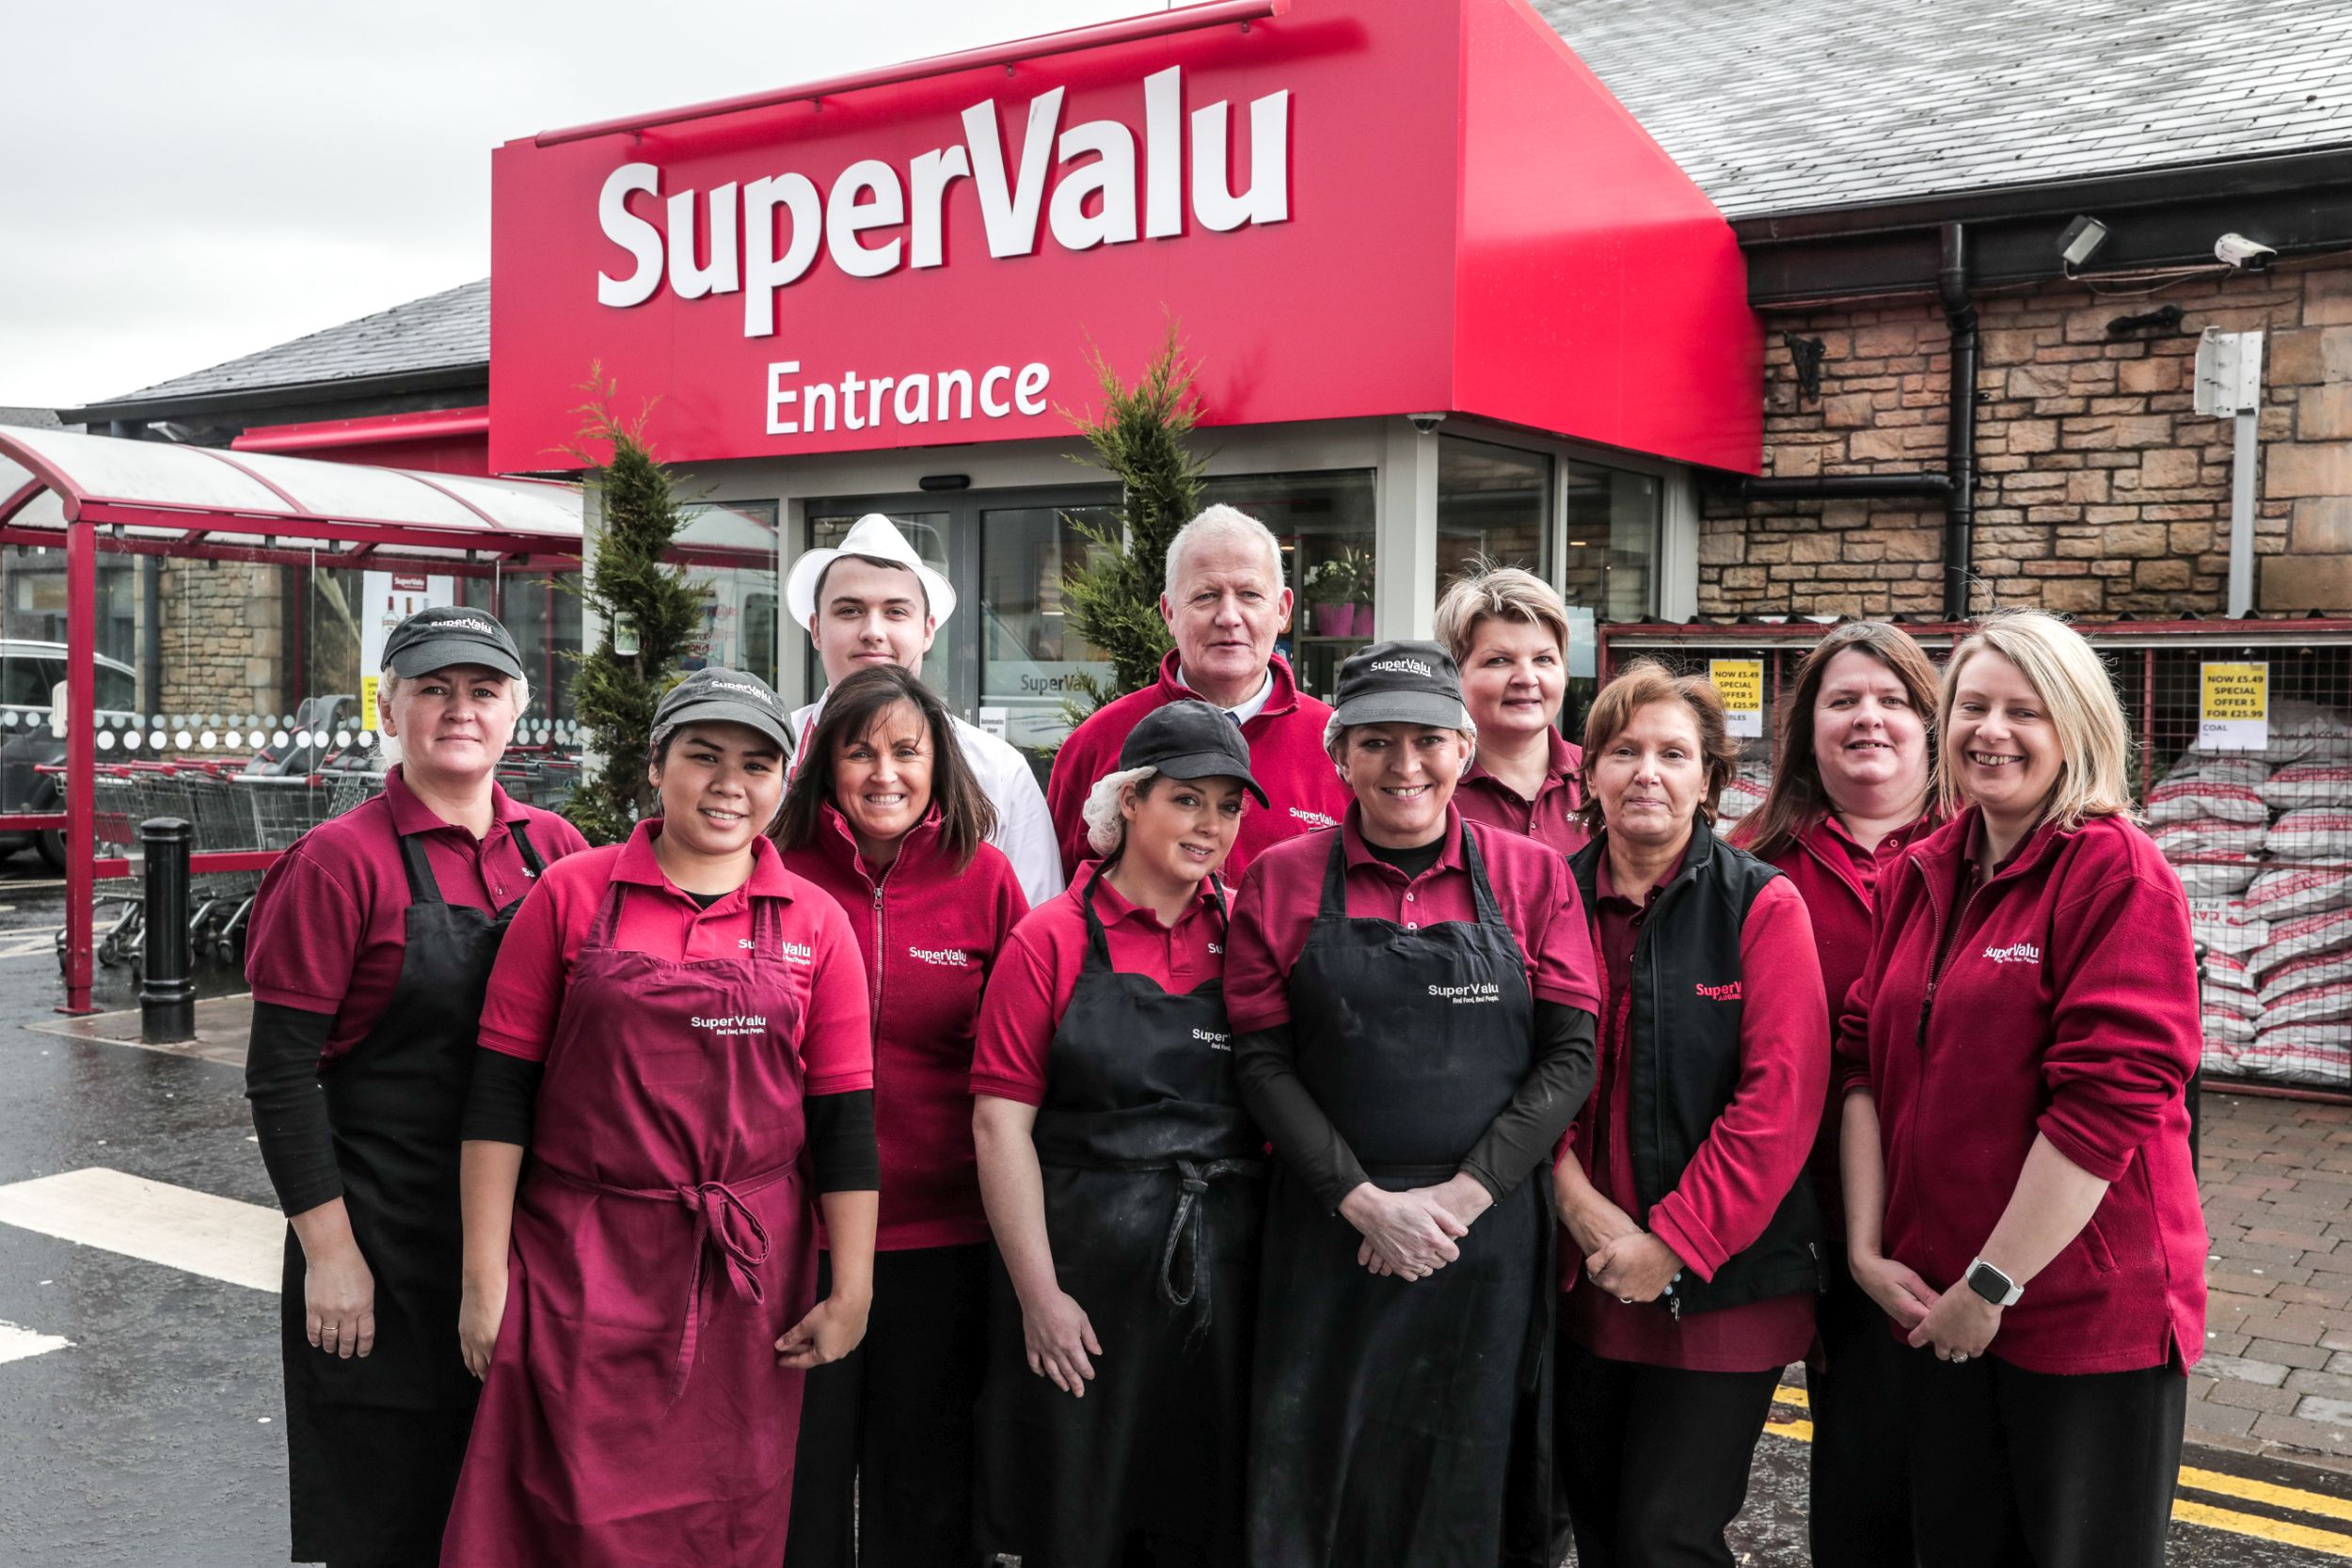 Supervalu and Centra ask public to nominate their store hero